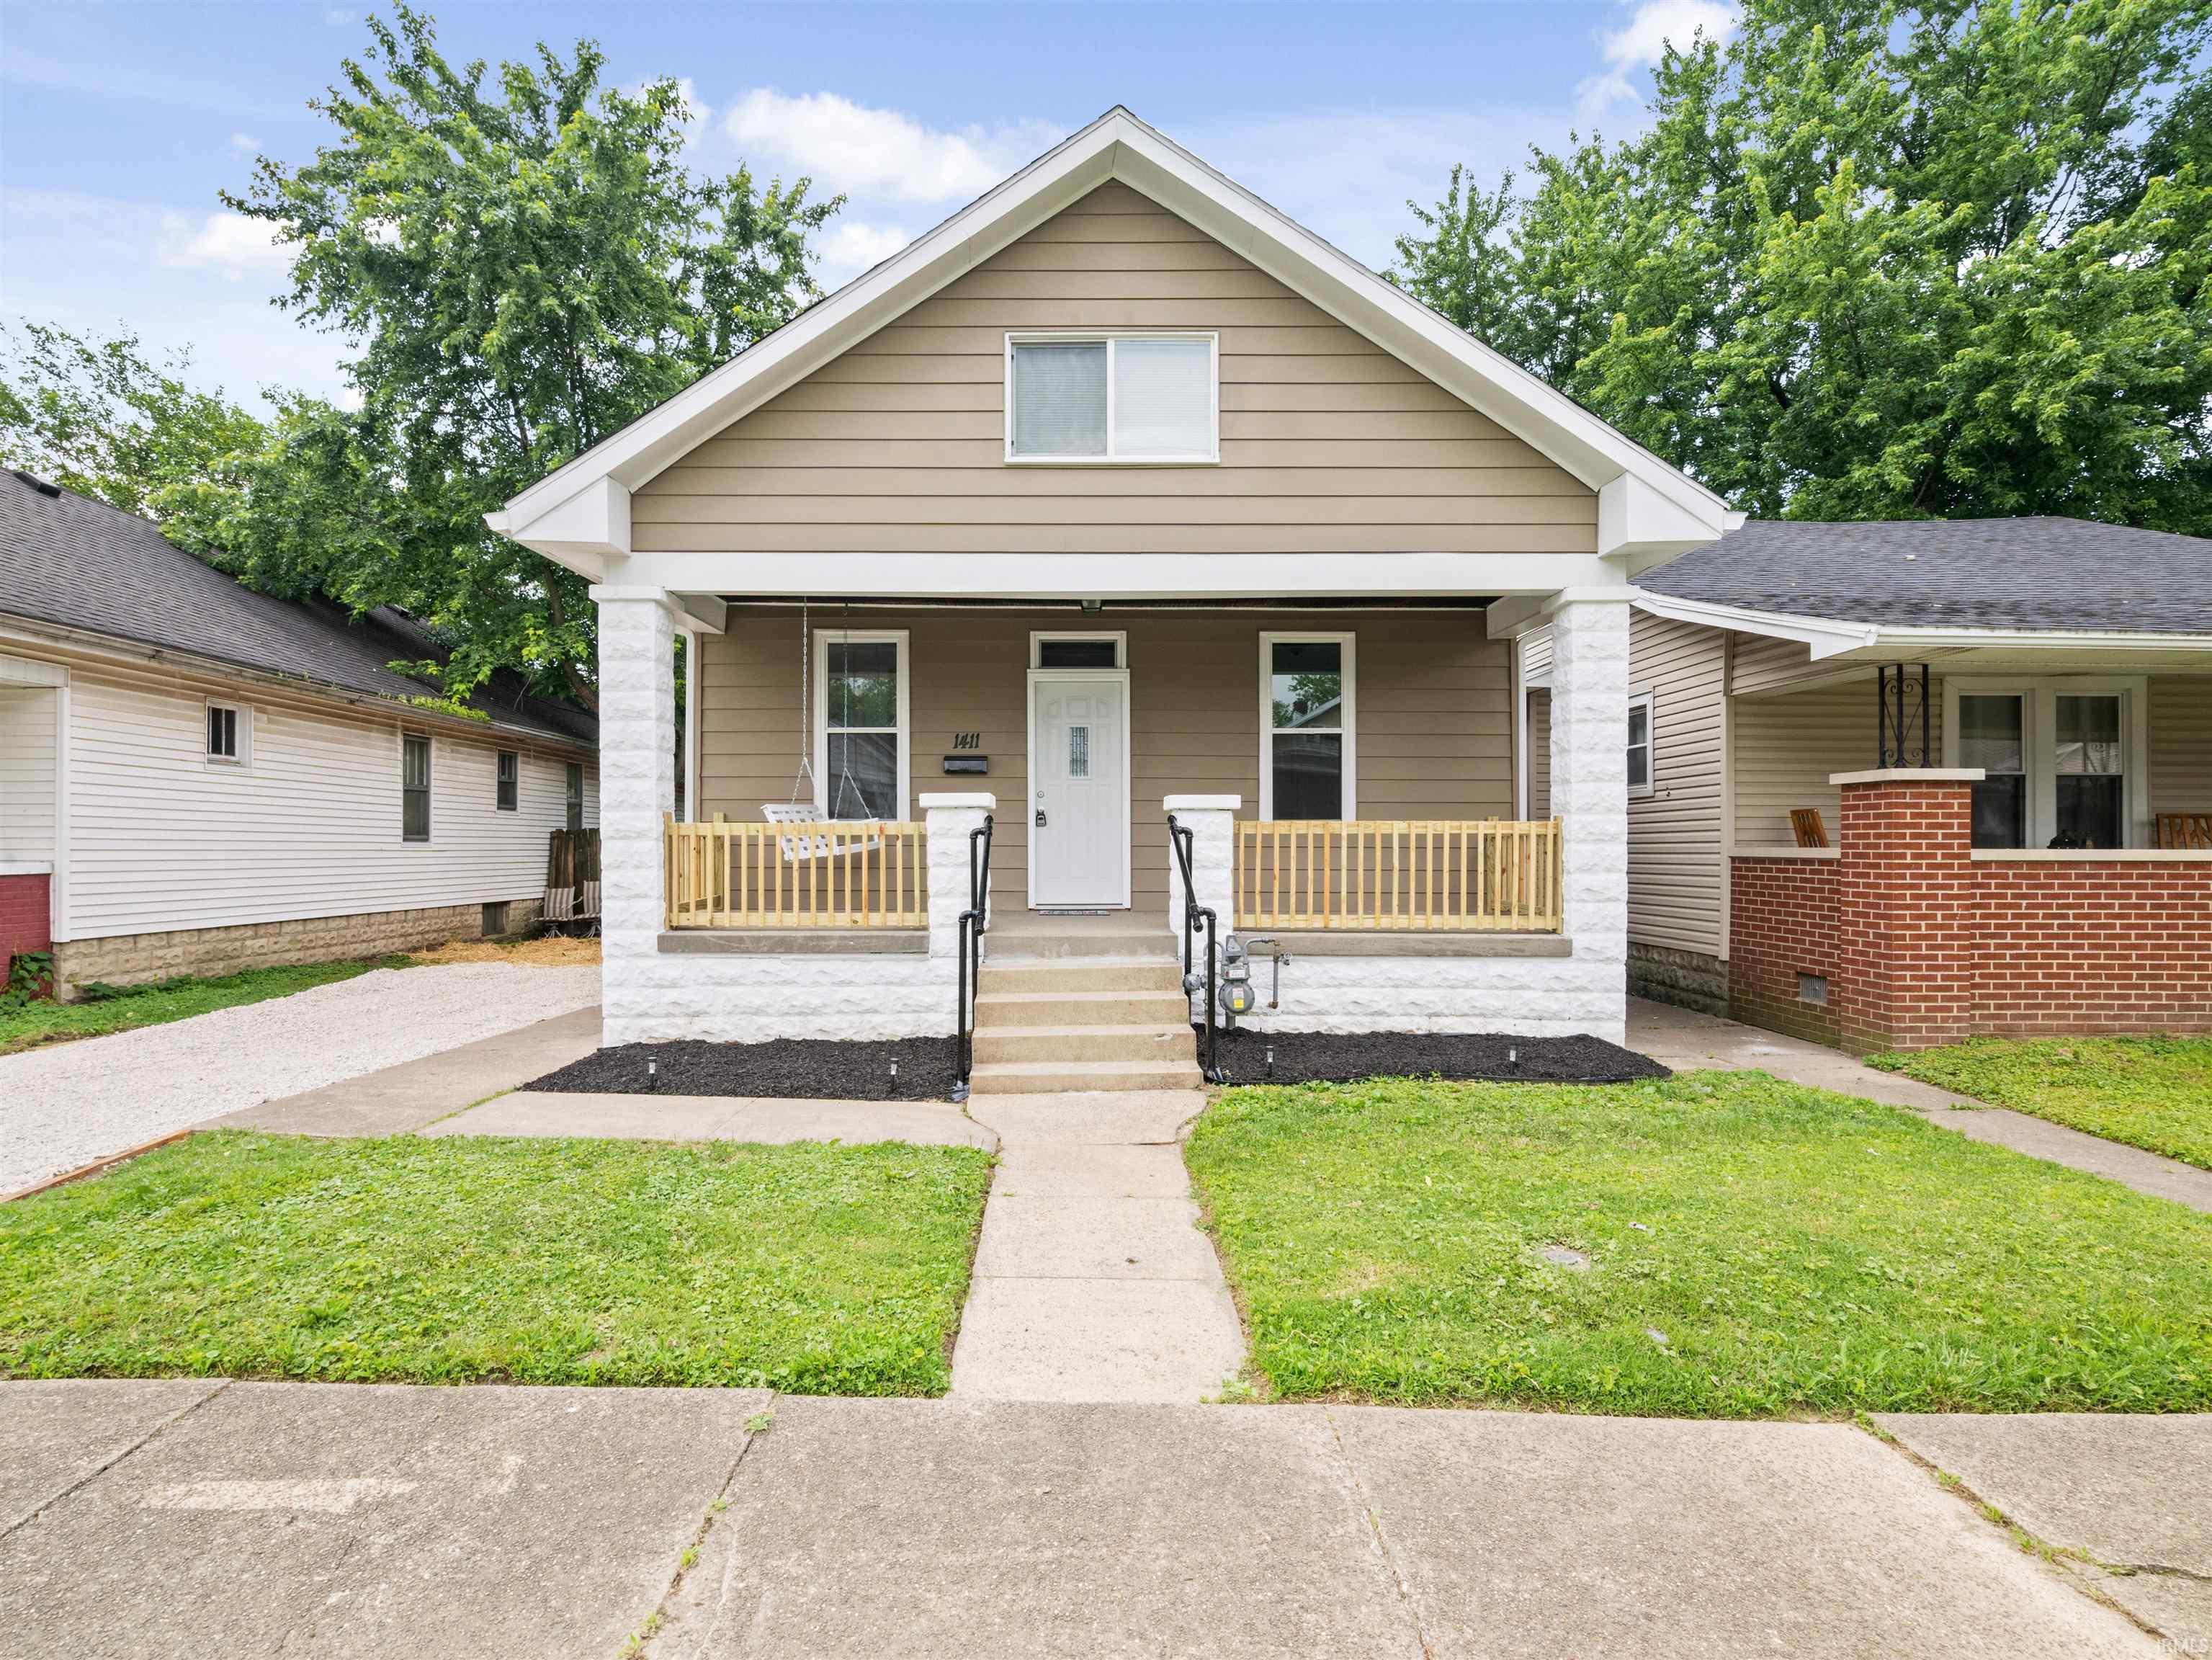 1411 E Sycamore Street, Evansville, IN 47714